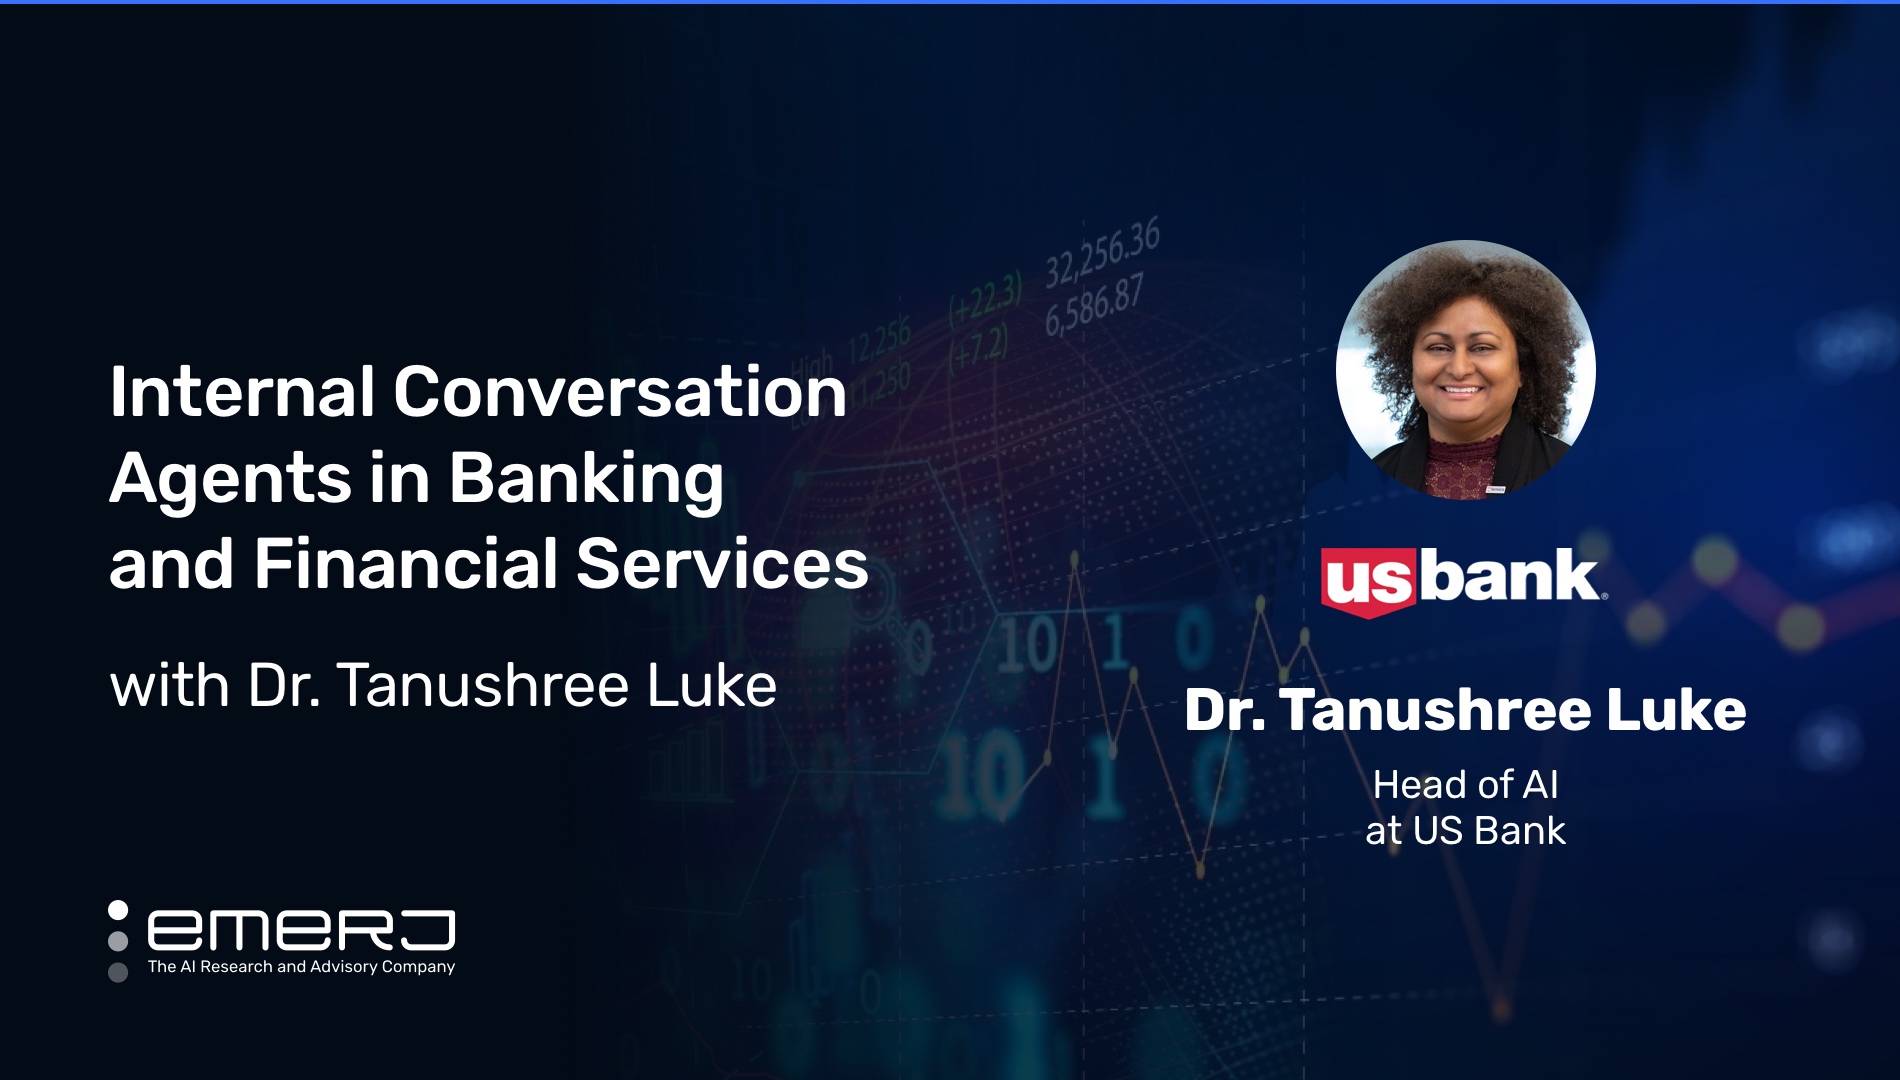 Internal Conversational Agents in Banking and Financial Services – with Dr. Tanushree Luke, Head of AI at US Bank